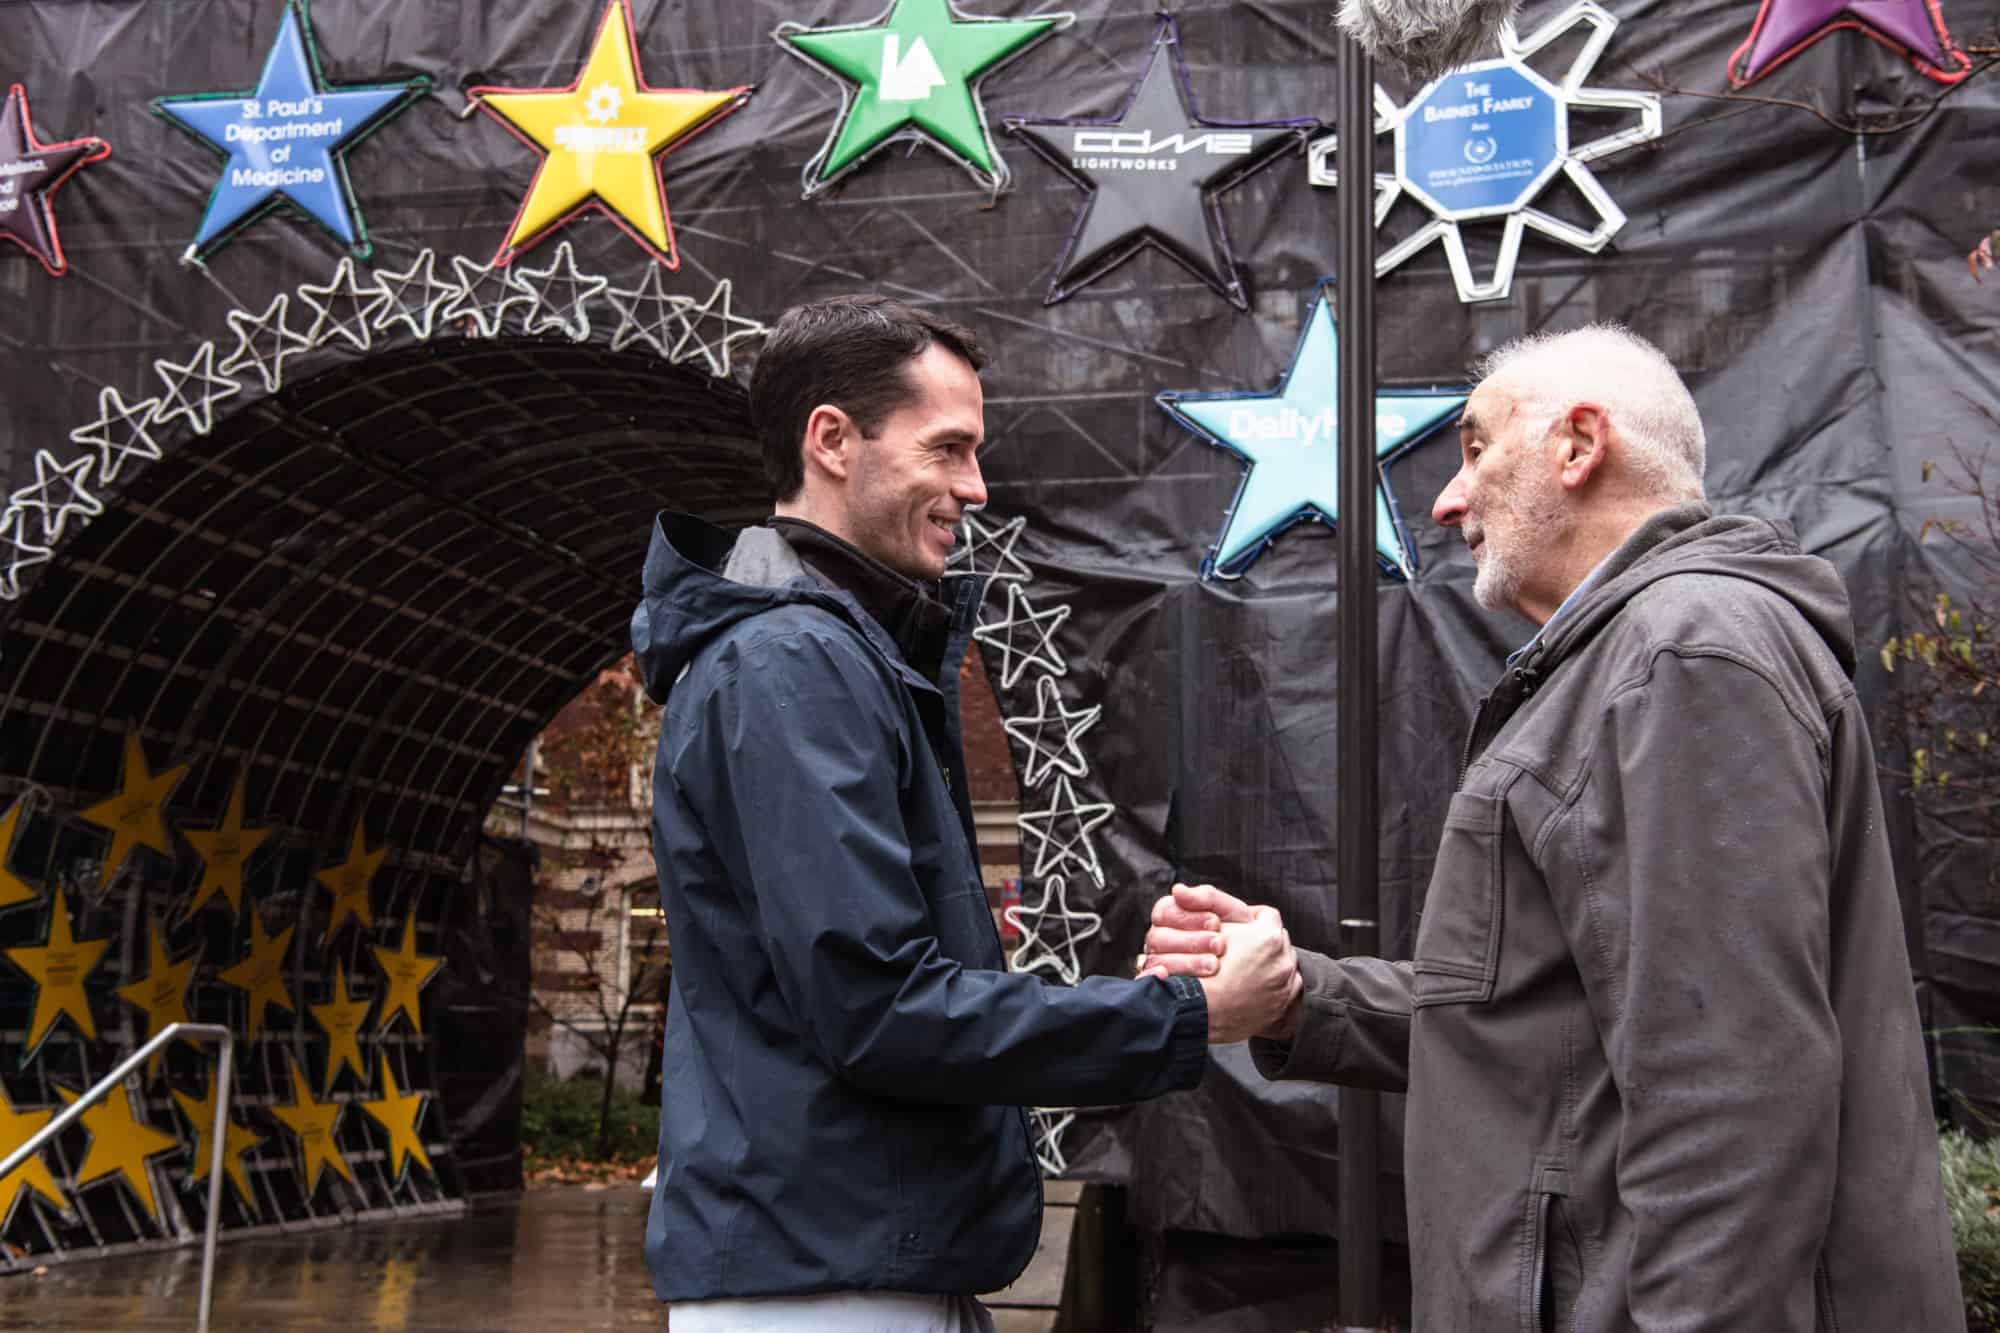 A photo of a nurse at St. Paul's Hospital, Luke Currie, and grateful patient, James Stitchman, shaking hands while standing outside St. Paul's Hospital in front of the Lights of Hope star display.